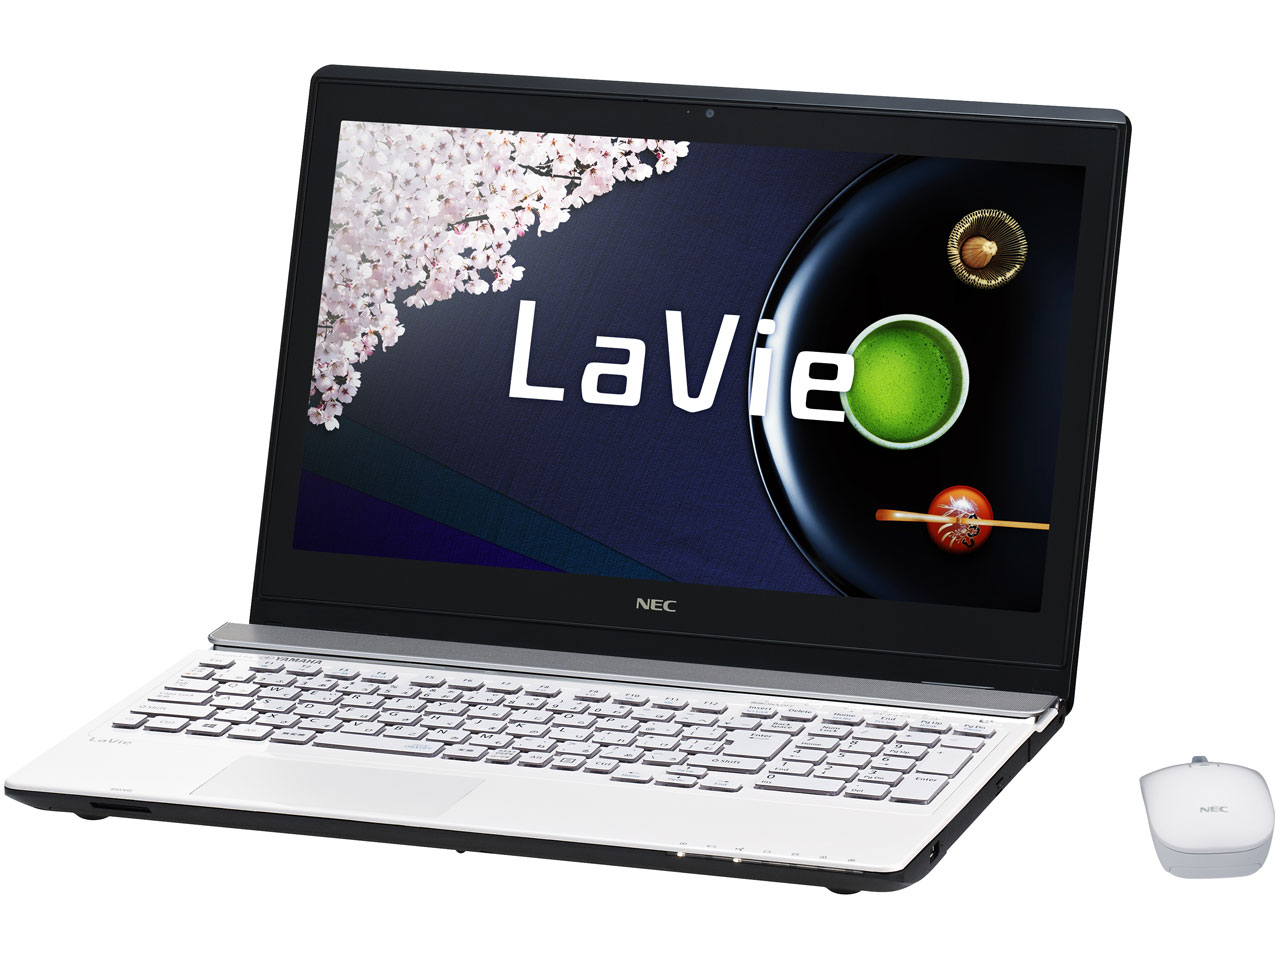 NEC LaVie Note Standard NS750/AAW PC-NS750AAW [クリスタルホワイト] 価格比較 - 価格.com